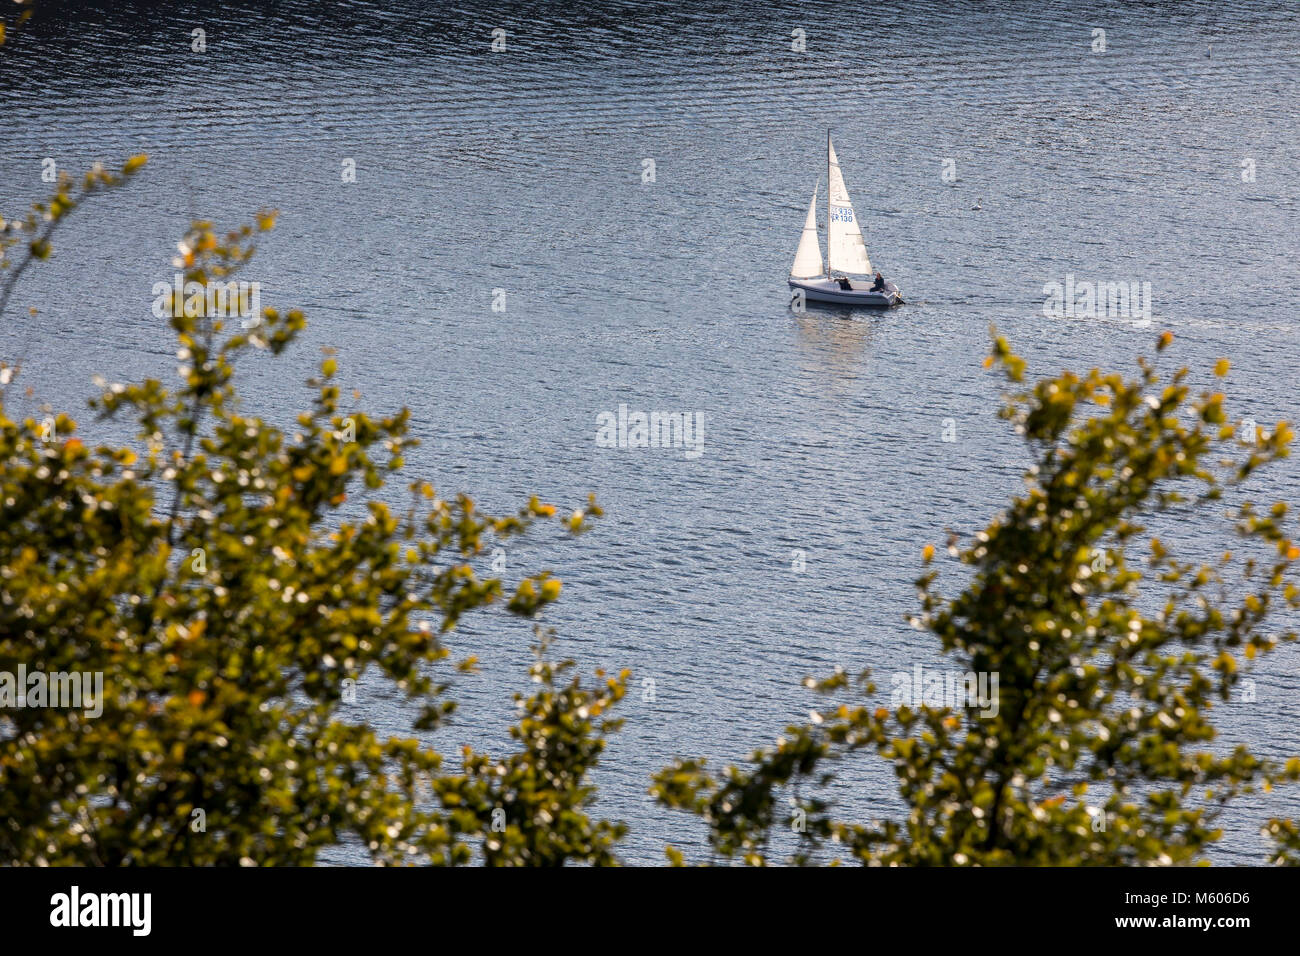 The Baldeneysee Lake, a reservoir of river Ruhr, in Essen, Germany, sailing boats, Stock Photo